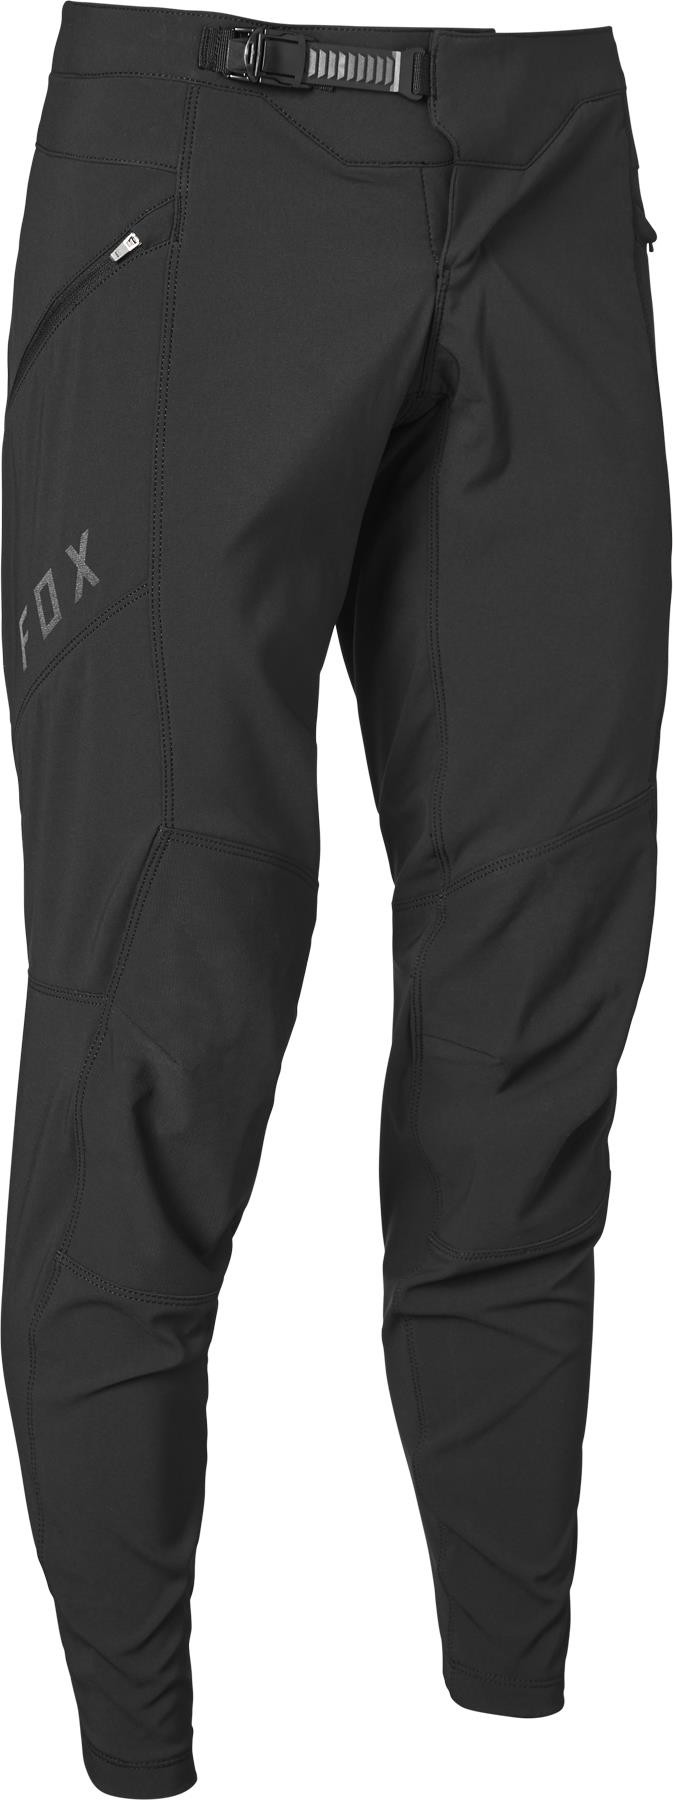 Defend Fire Womens MTB Cycling Trousers image 0